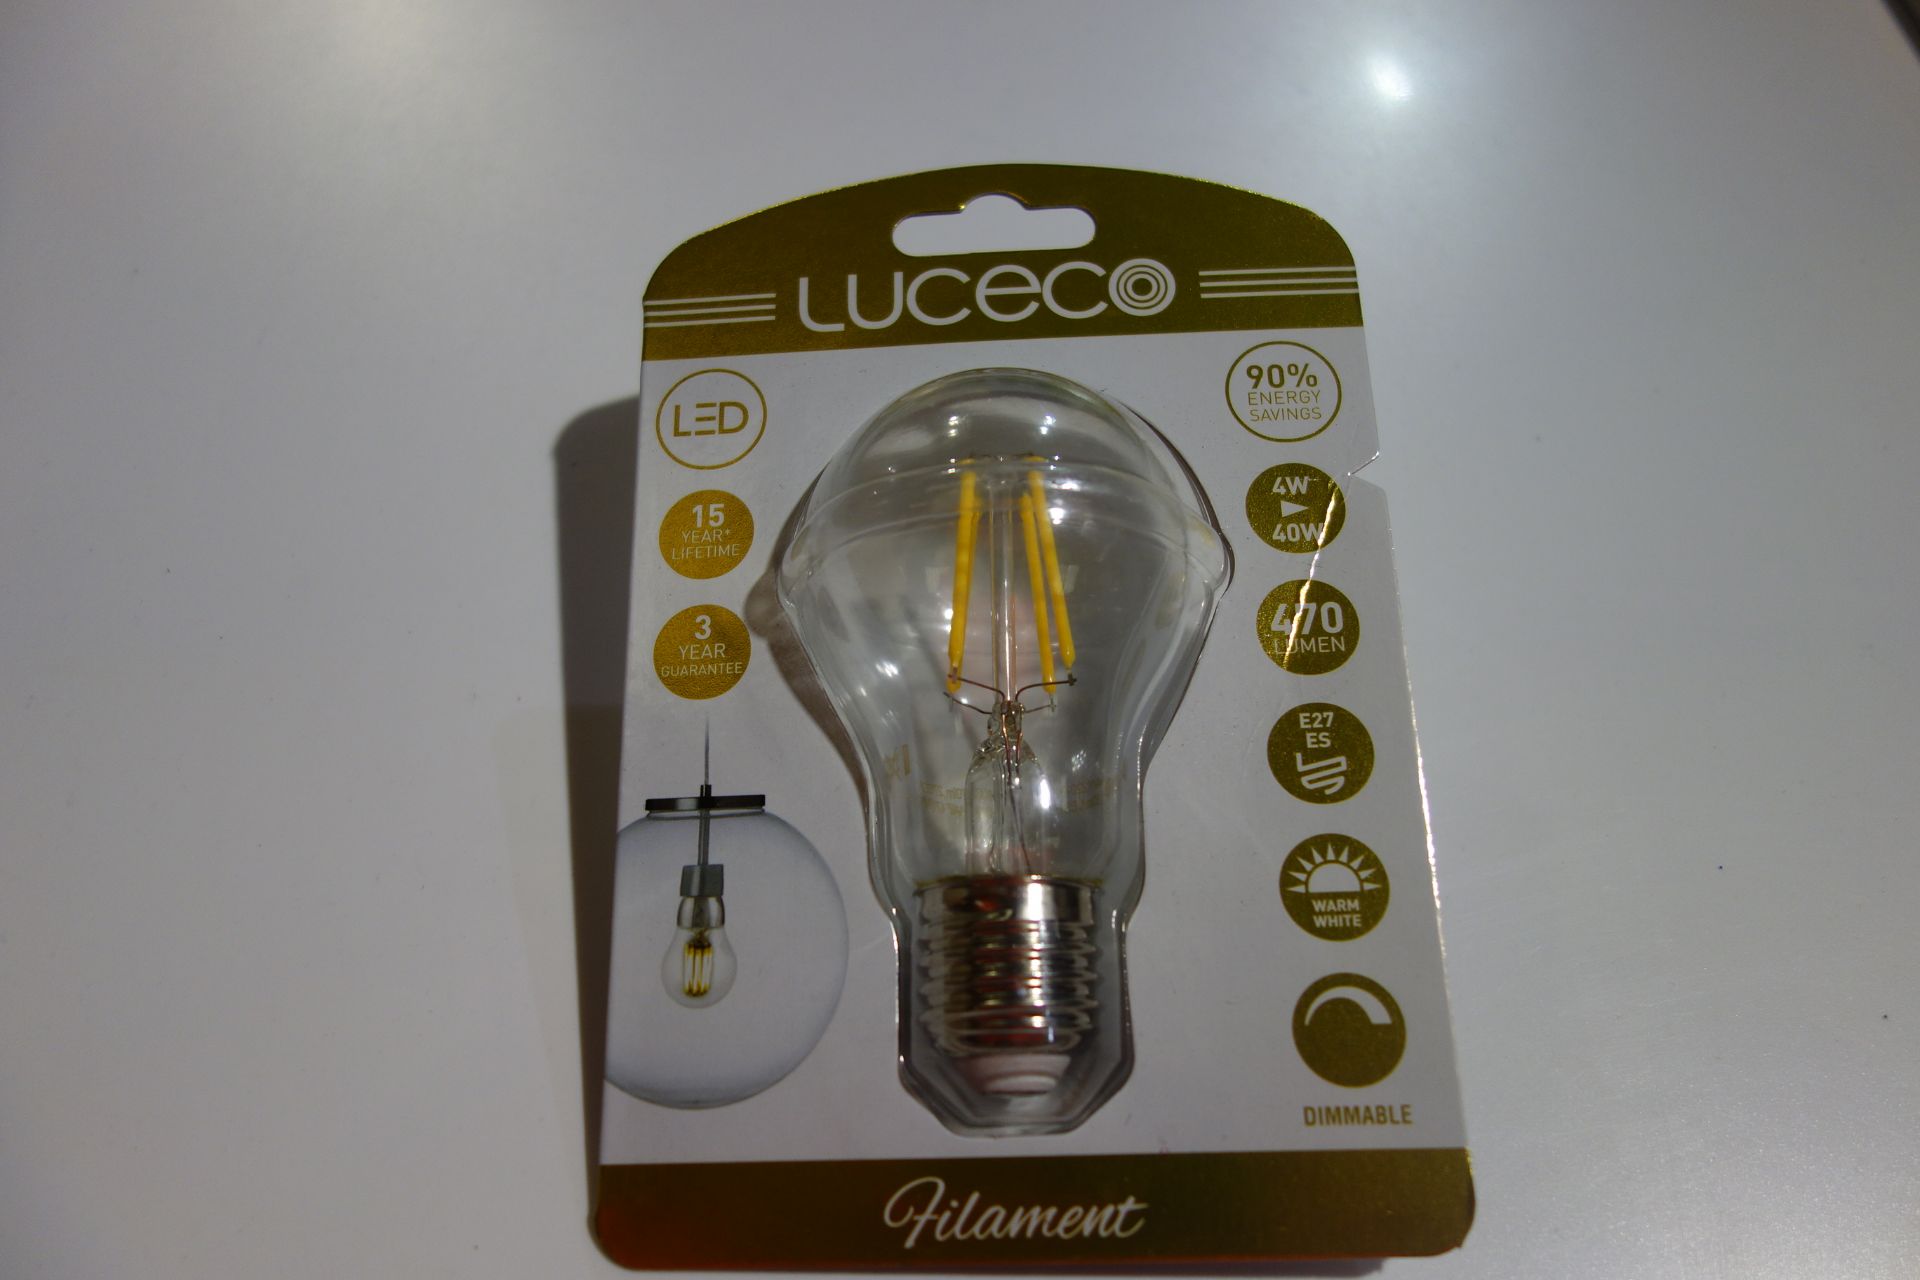 100 X Luceco LAD27WF-47-LE MK LED Lapms 4W = 40W E27 Fitting Dimmable 470 Lumens With Filament